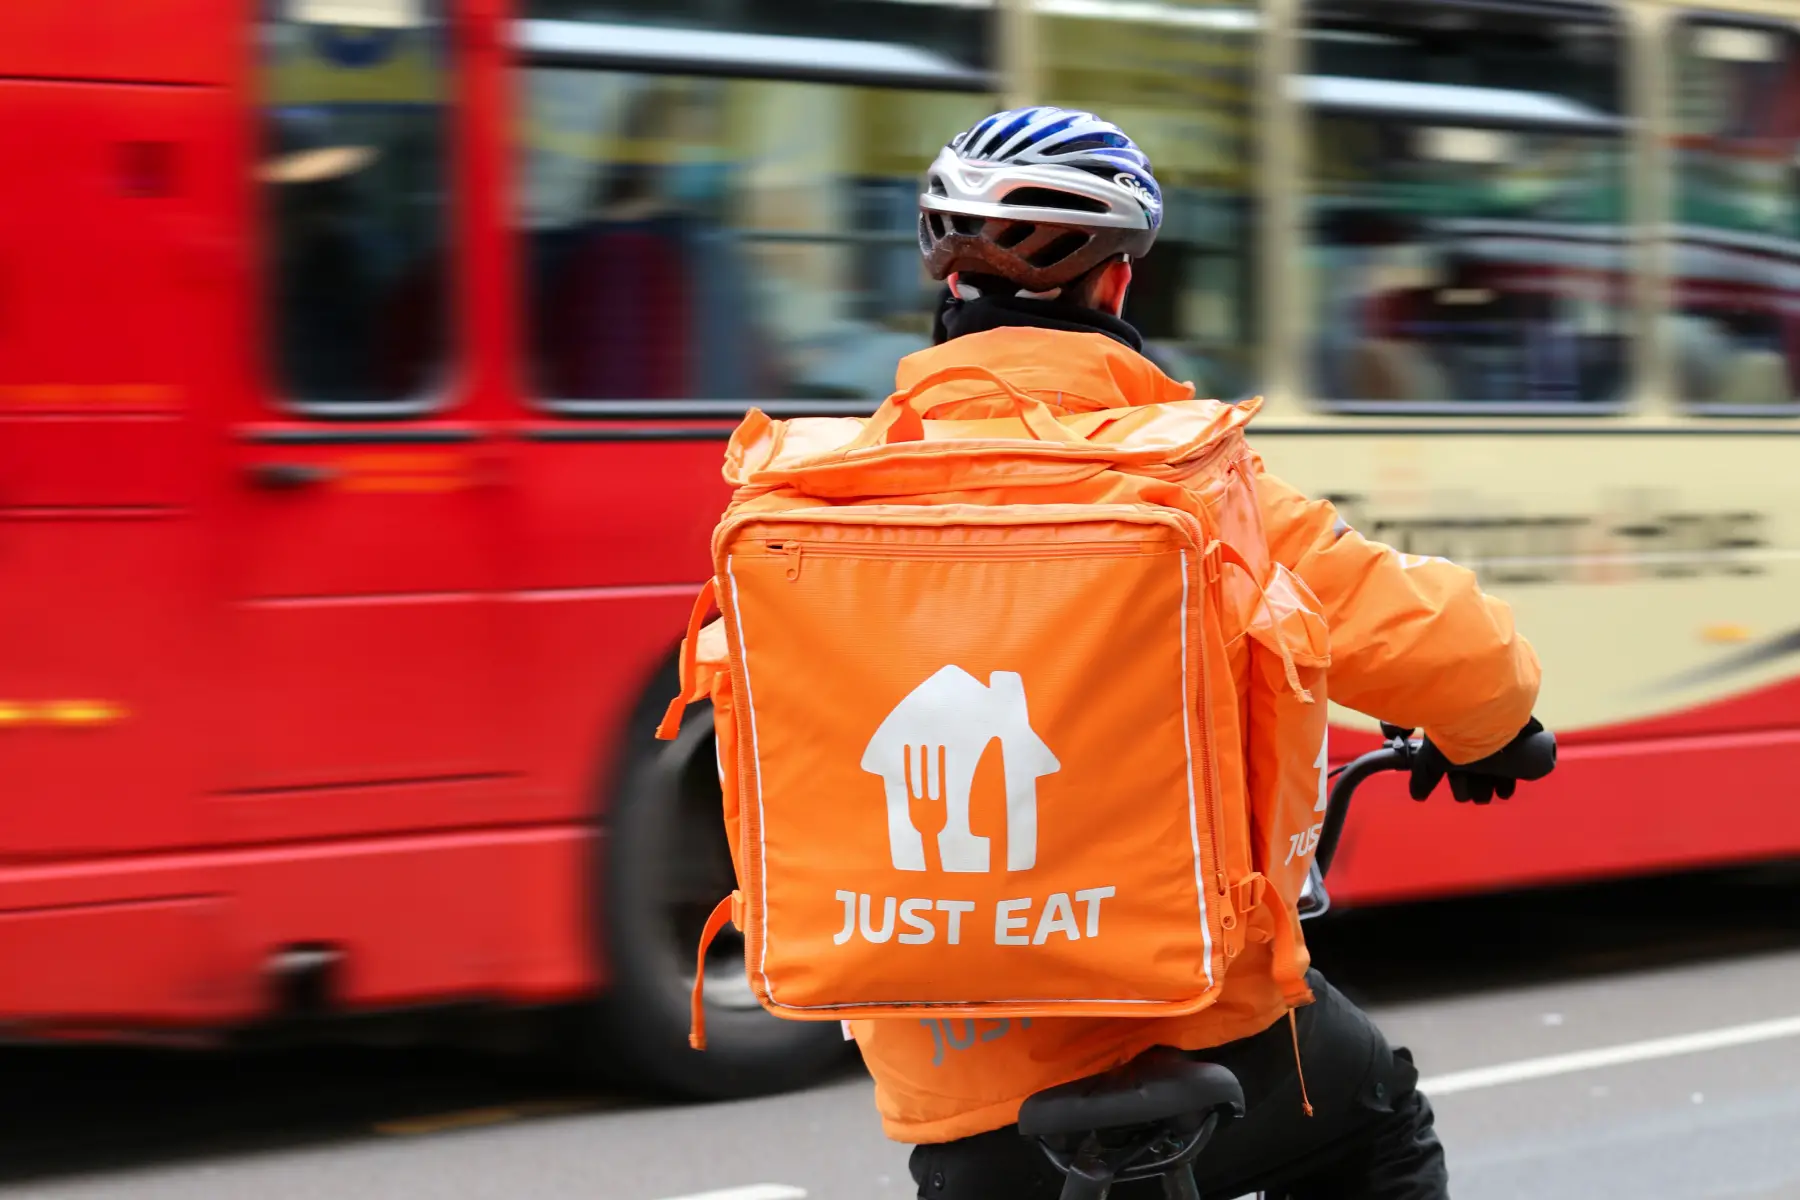 A Just Eat delivery driver on a bicycle, waiting for a bus to pass.